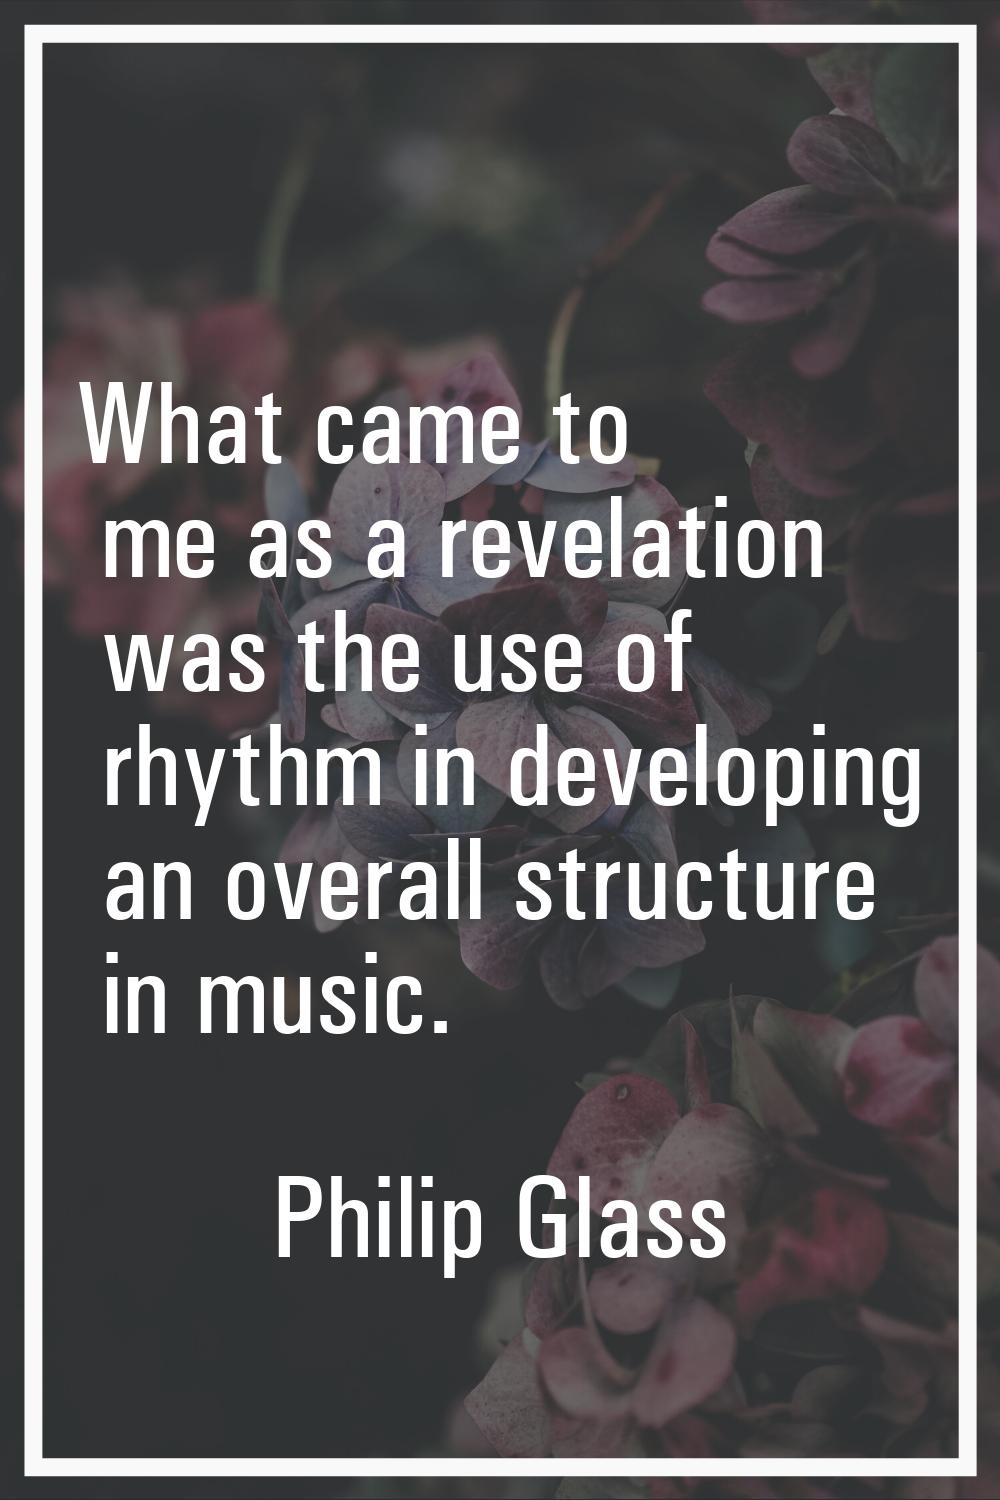 What came to me as a revelation was the use of rhythm in developing an overall structure in music.